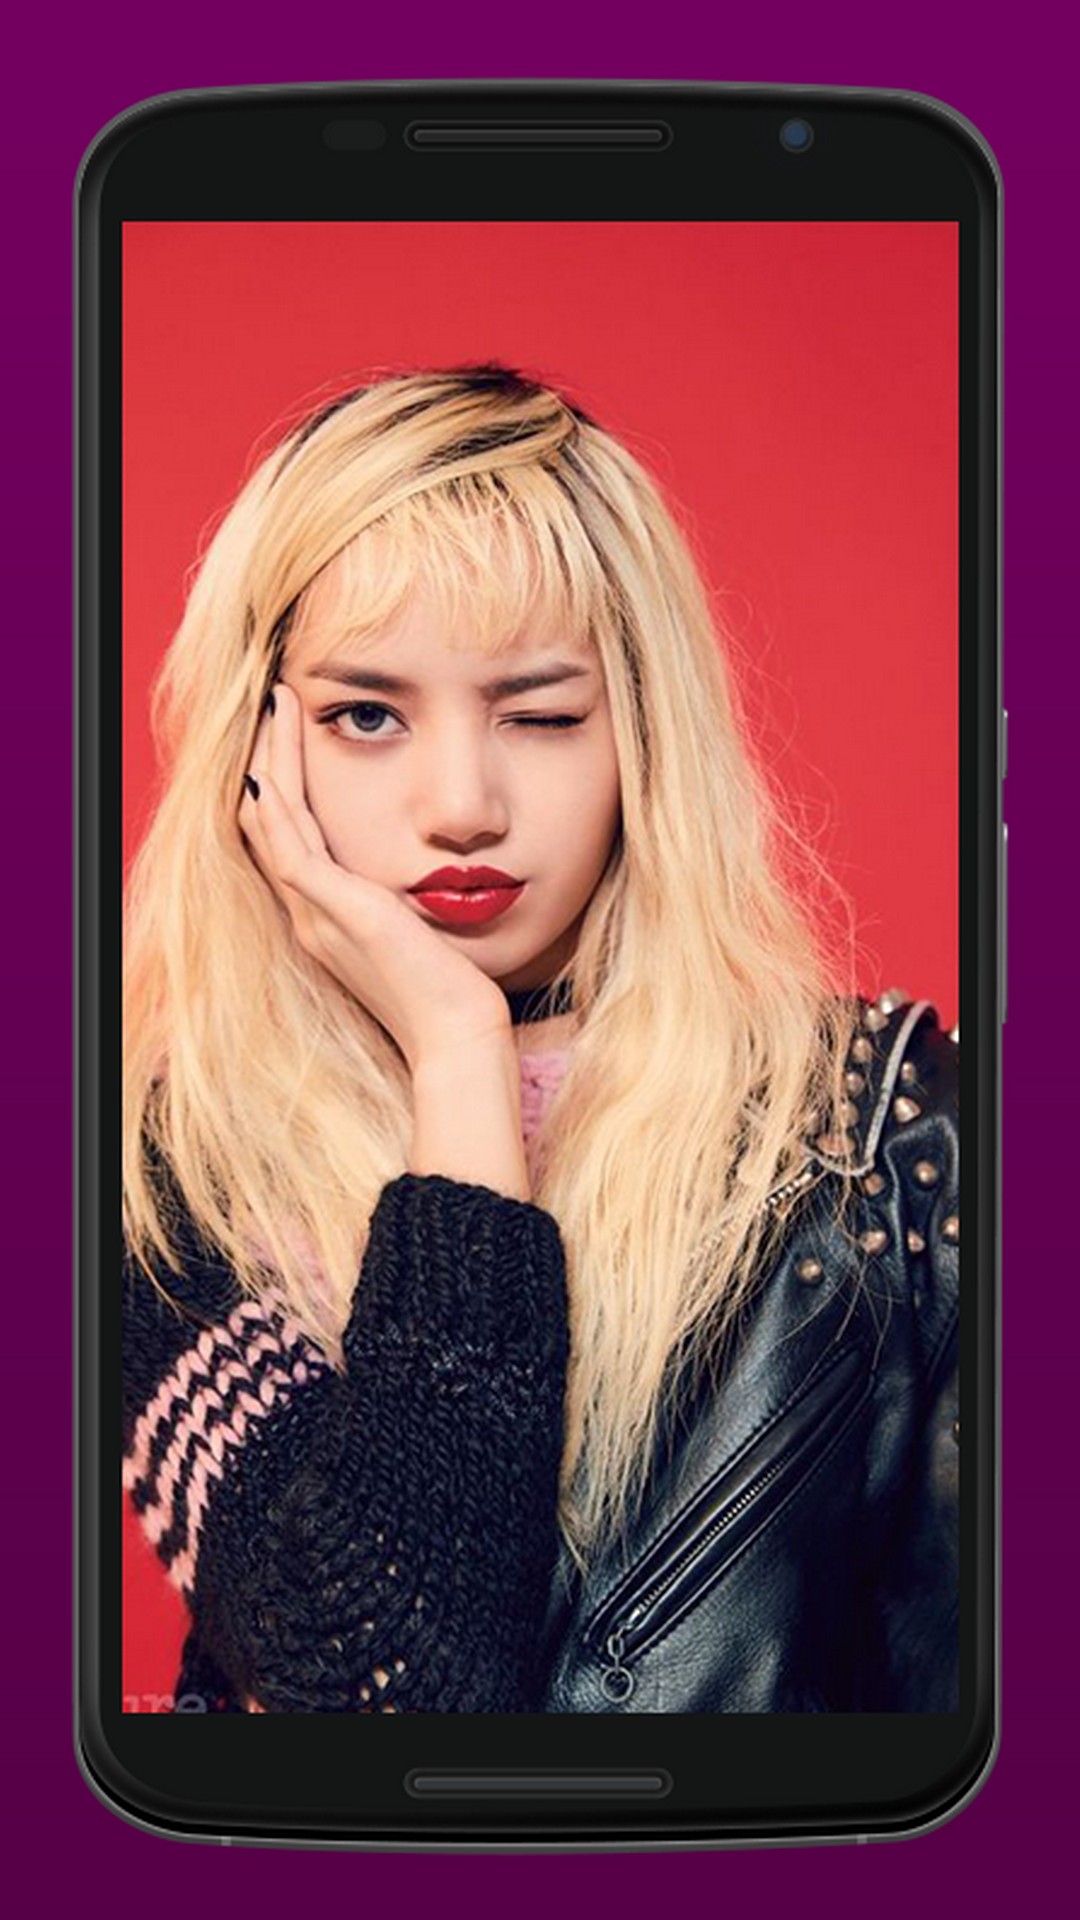 Lisa Blackpink iPhone Wallpaper with high-resolution 1080x1920 pixel. You can set as wallpaper for Apple iPhone X, XS Max, XR, 8, 7, 6, SE, iPad. Enjoy and share your favorite HD wallpapers and background images